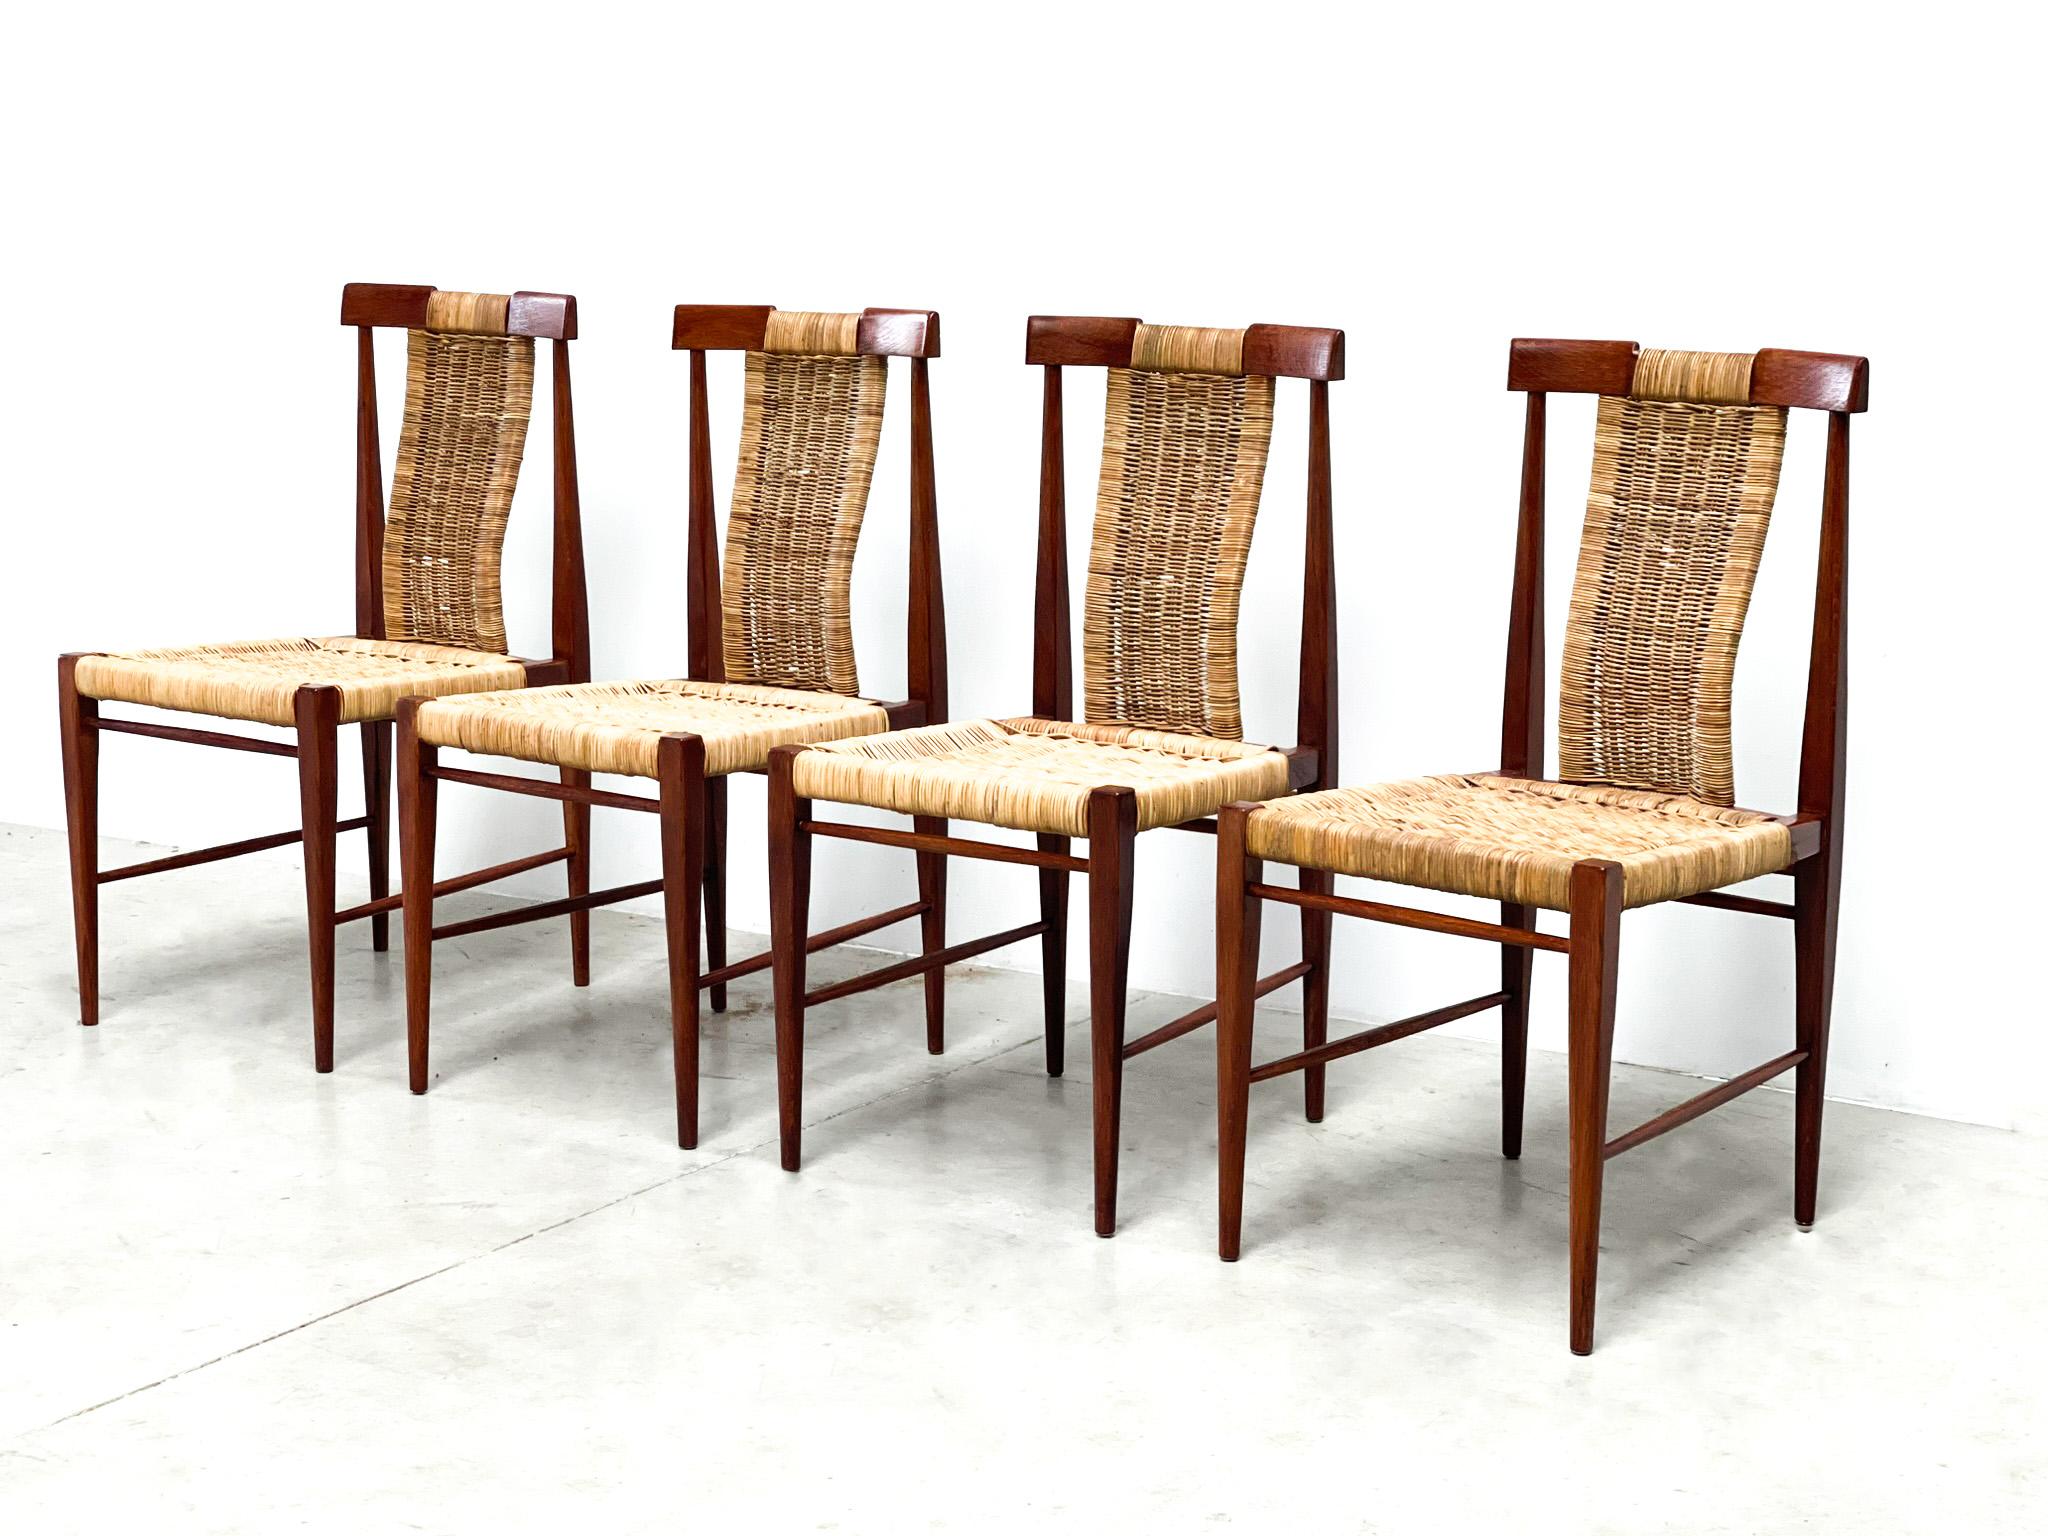 Vintage Teak and Wicker Dining Chairs, 1960s For Sale 1